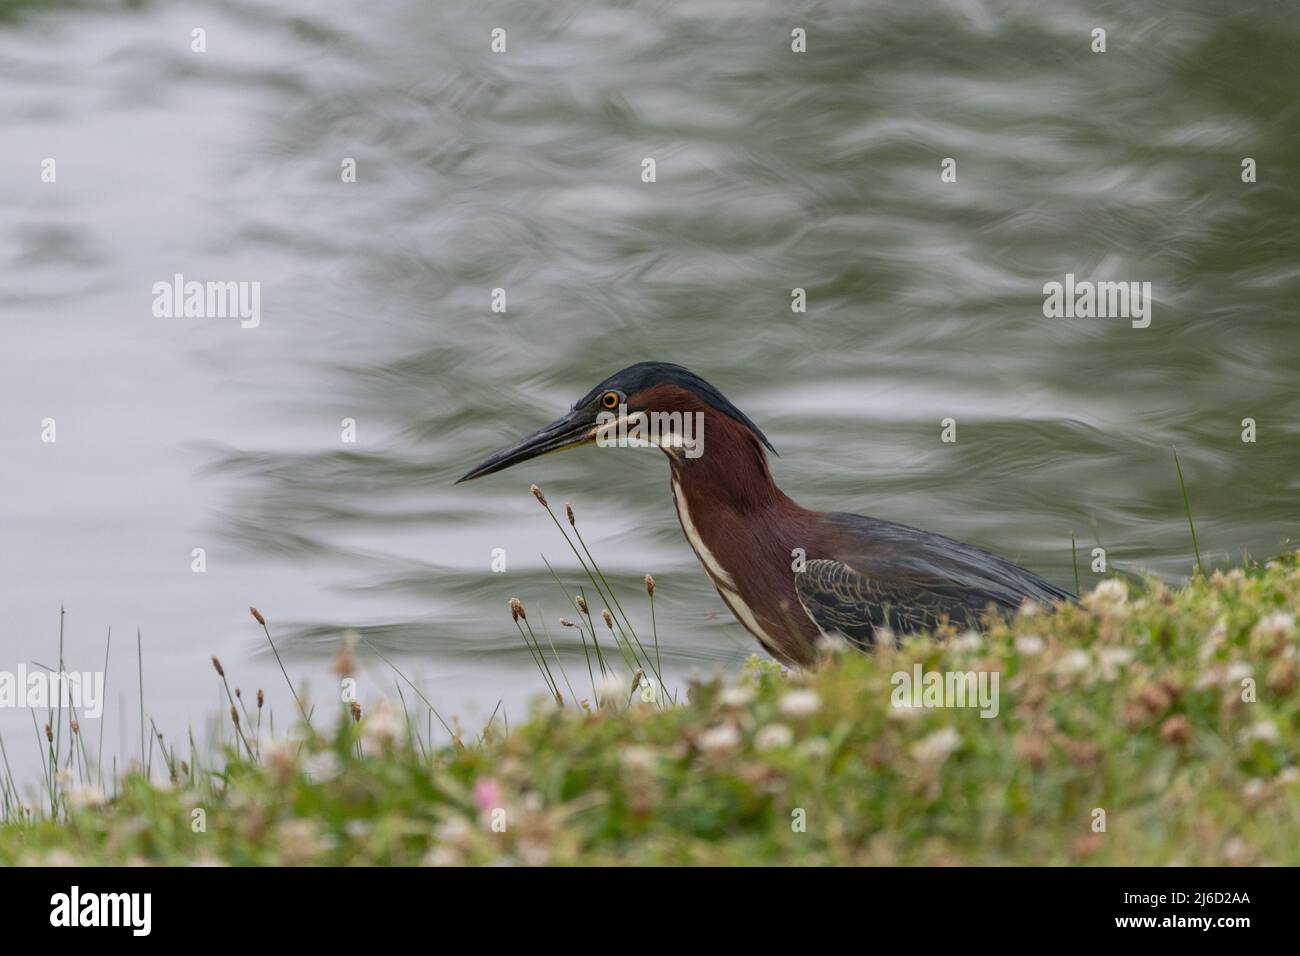 Green Heron searching for food on the shore of a pond with the blurry water creating an artistic background. Stock Photo